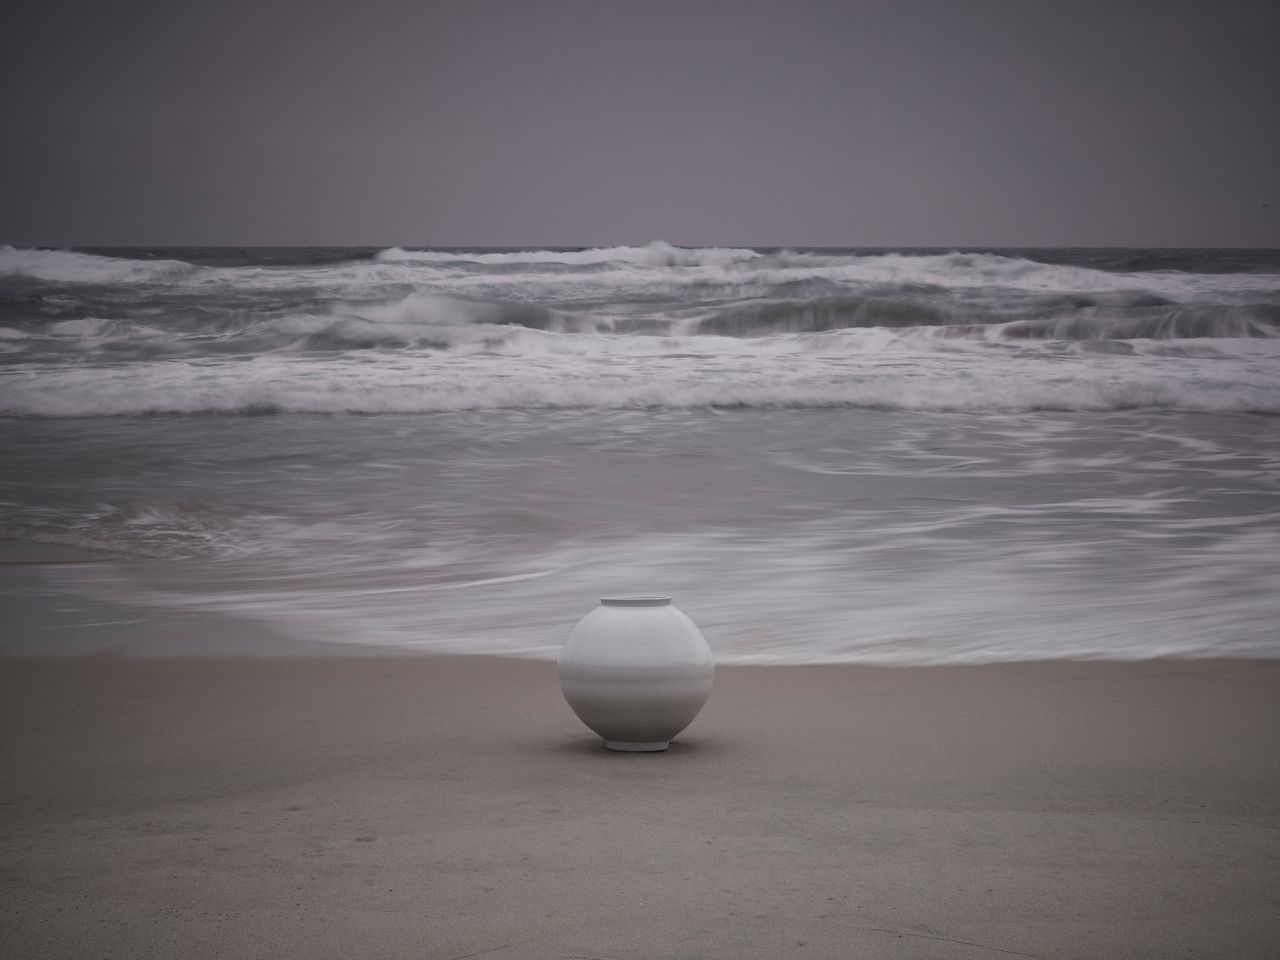 A modern-day moon jar made by South Korean potter Kwon Dae Sup, who said: "To appreciate a moon jar properly, you should look beyond its simple shape. Although it is a plain porcelain jar with no decorative elements whatsoever, it will seem different every time you look at it, depending on the circumstances. It will look quite different when you feel good and when you feel gloomy, when the weather is sunny, rainy, or cloudy."